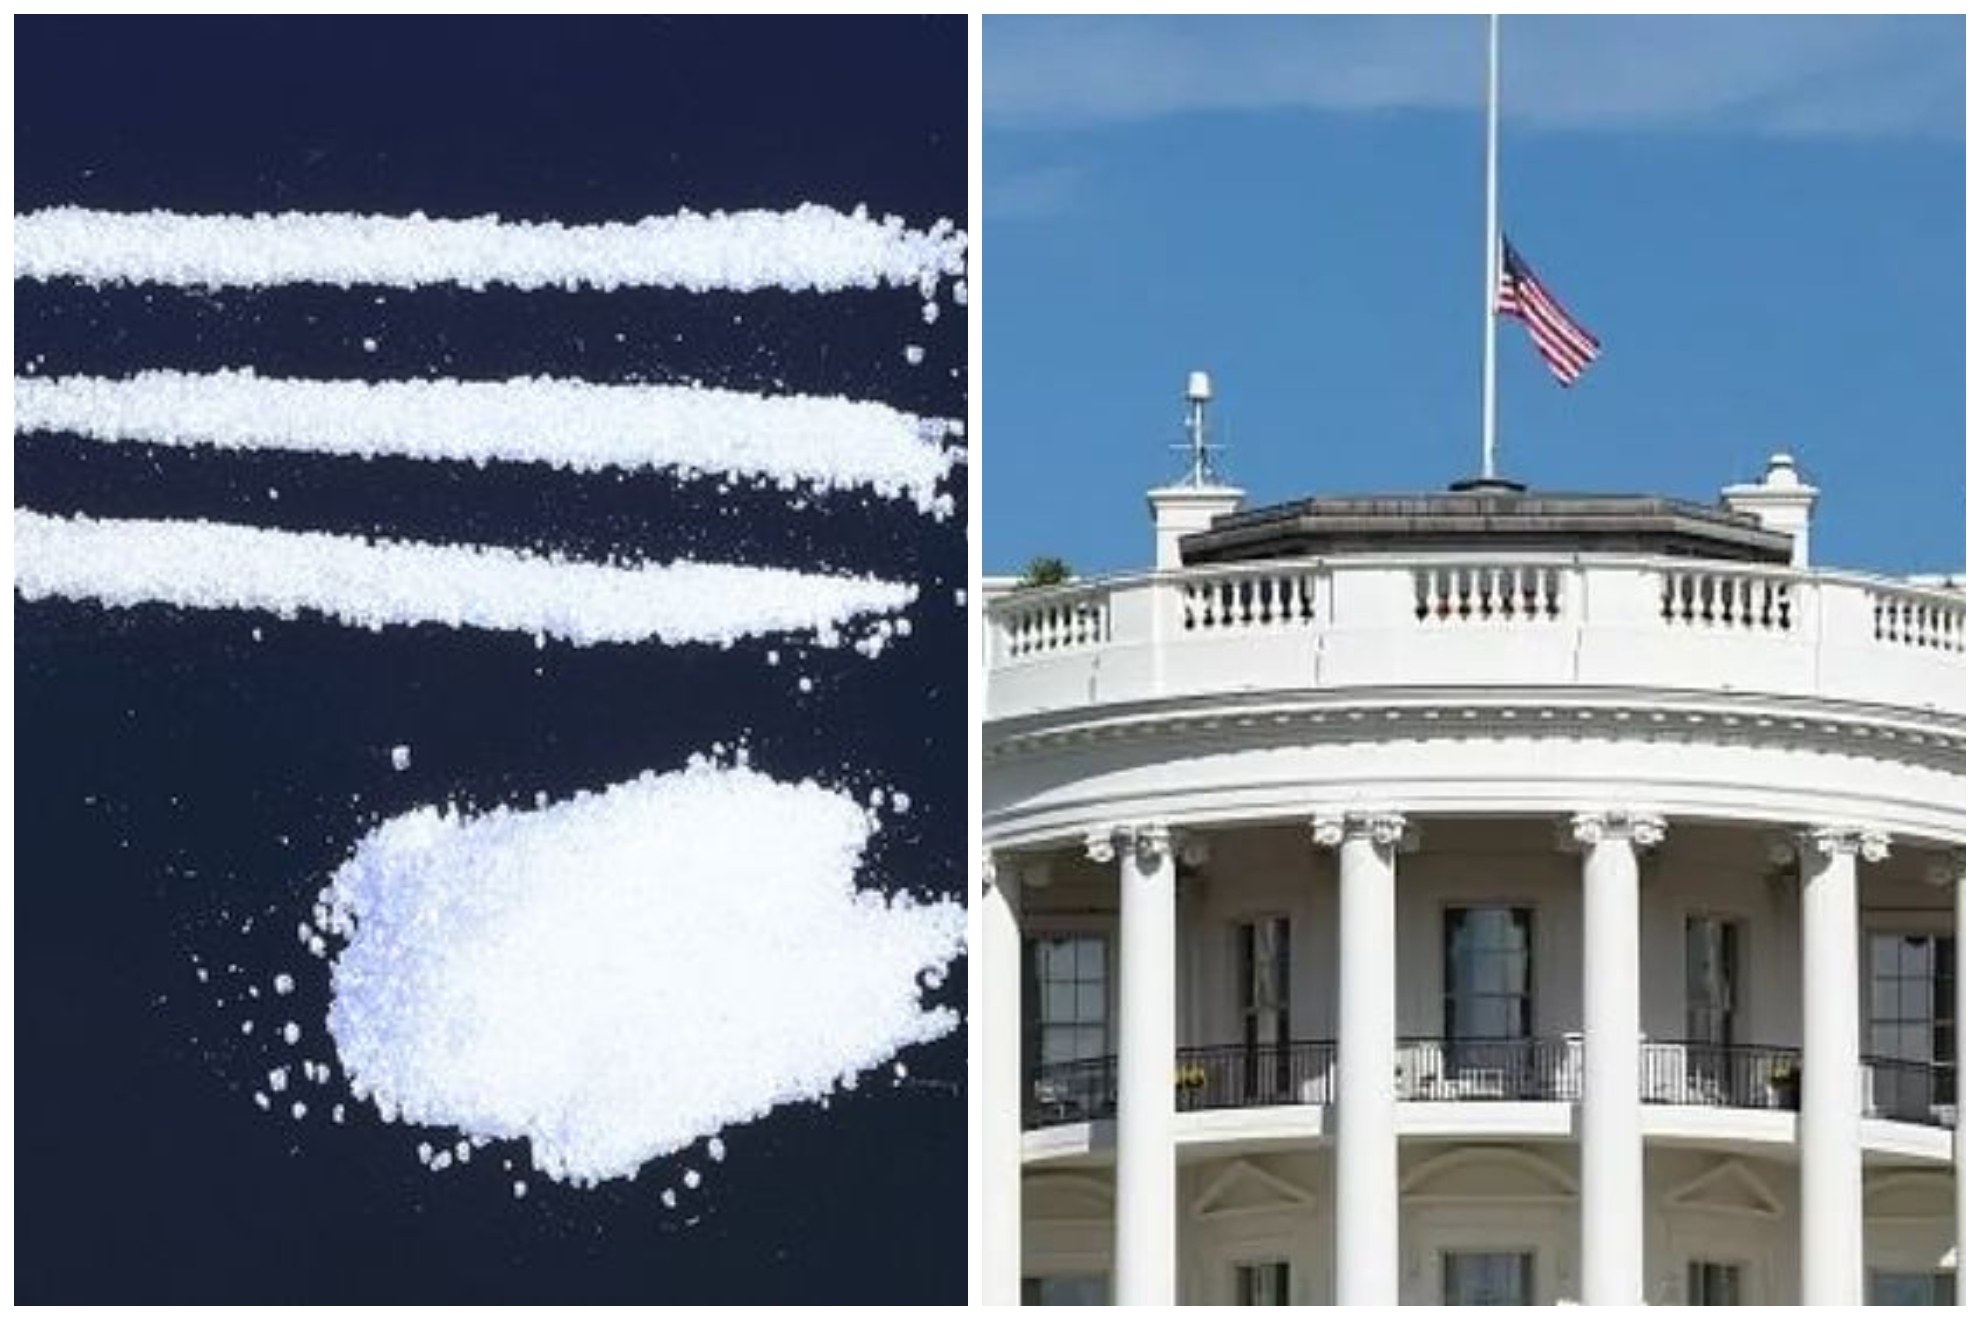 Cocaine found in the White House